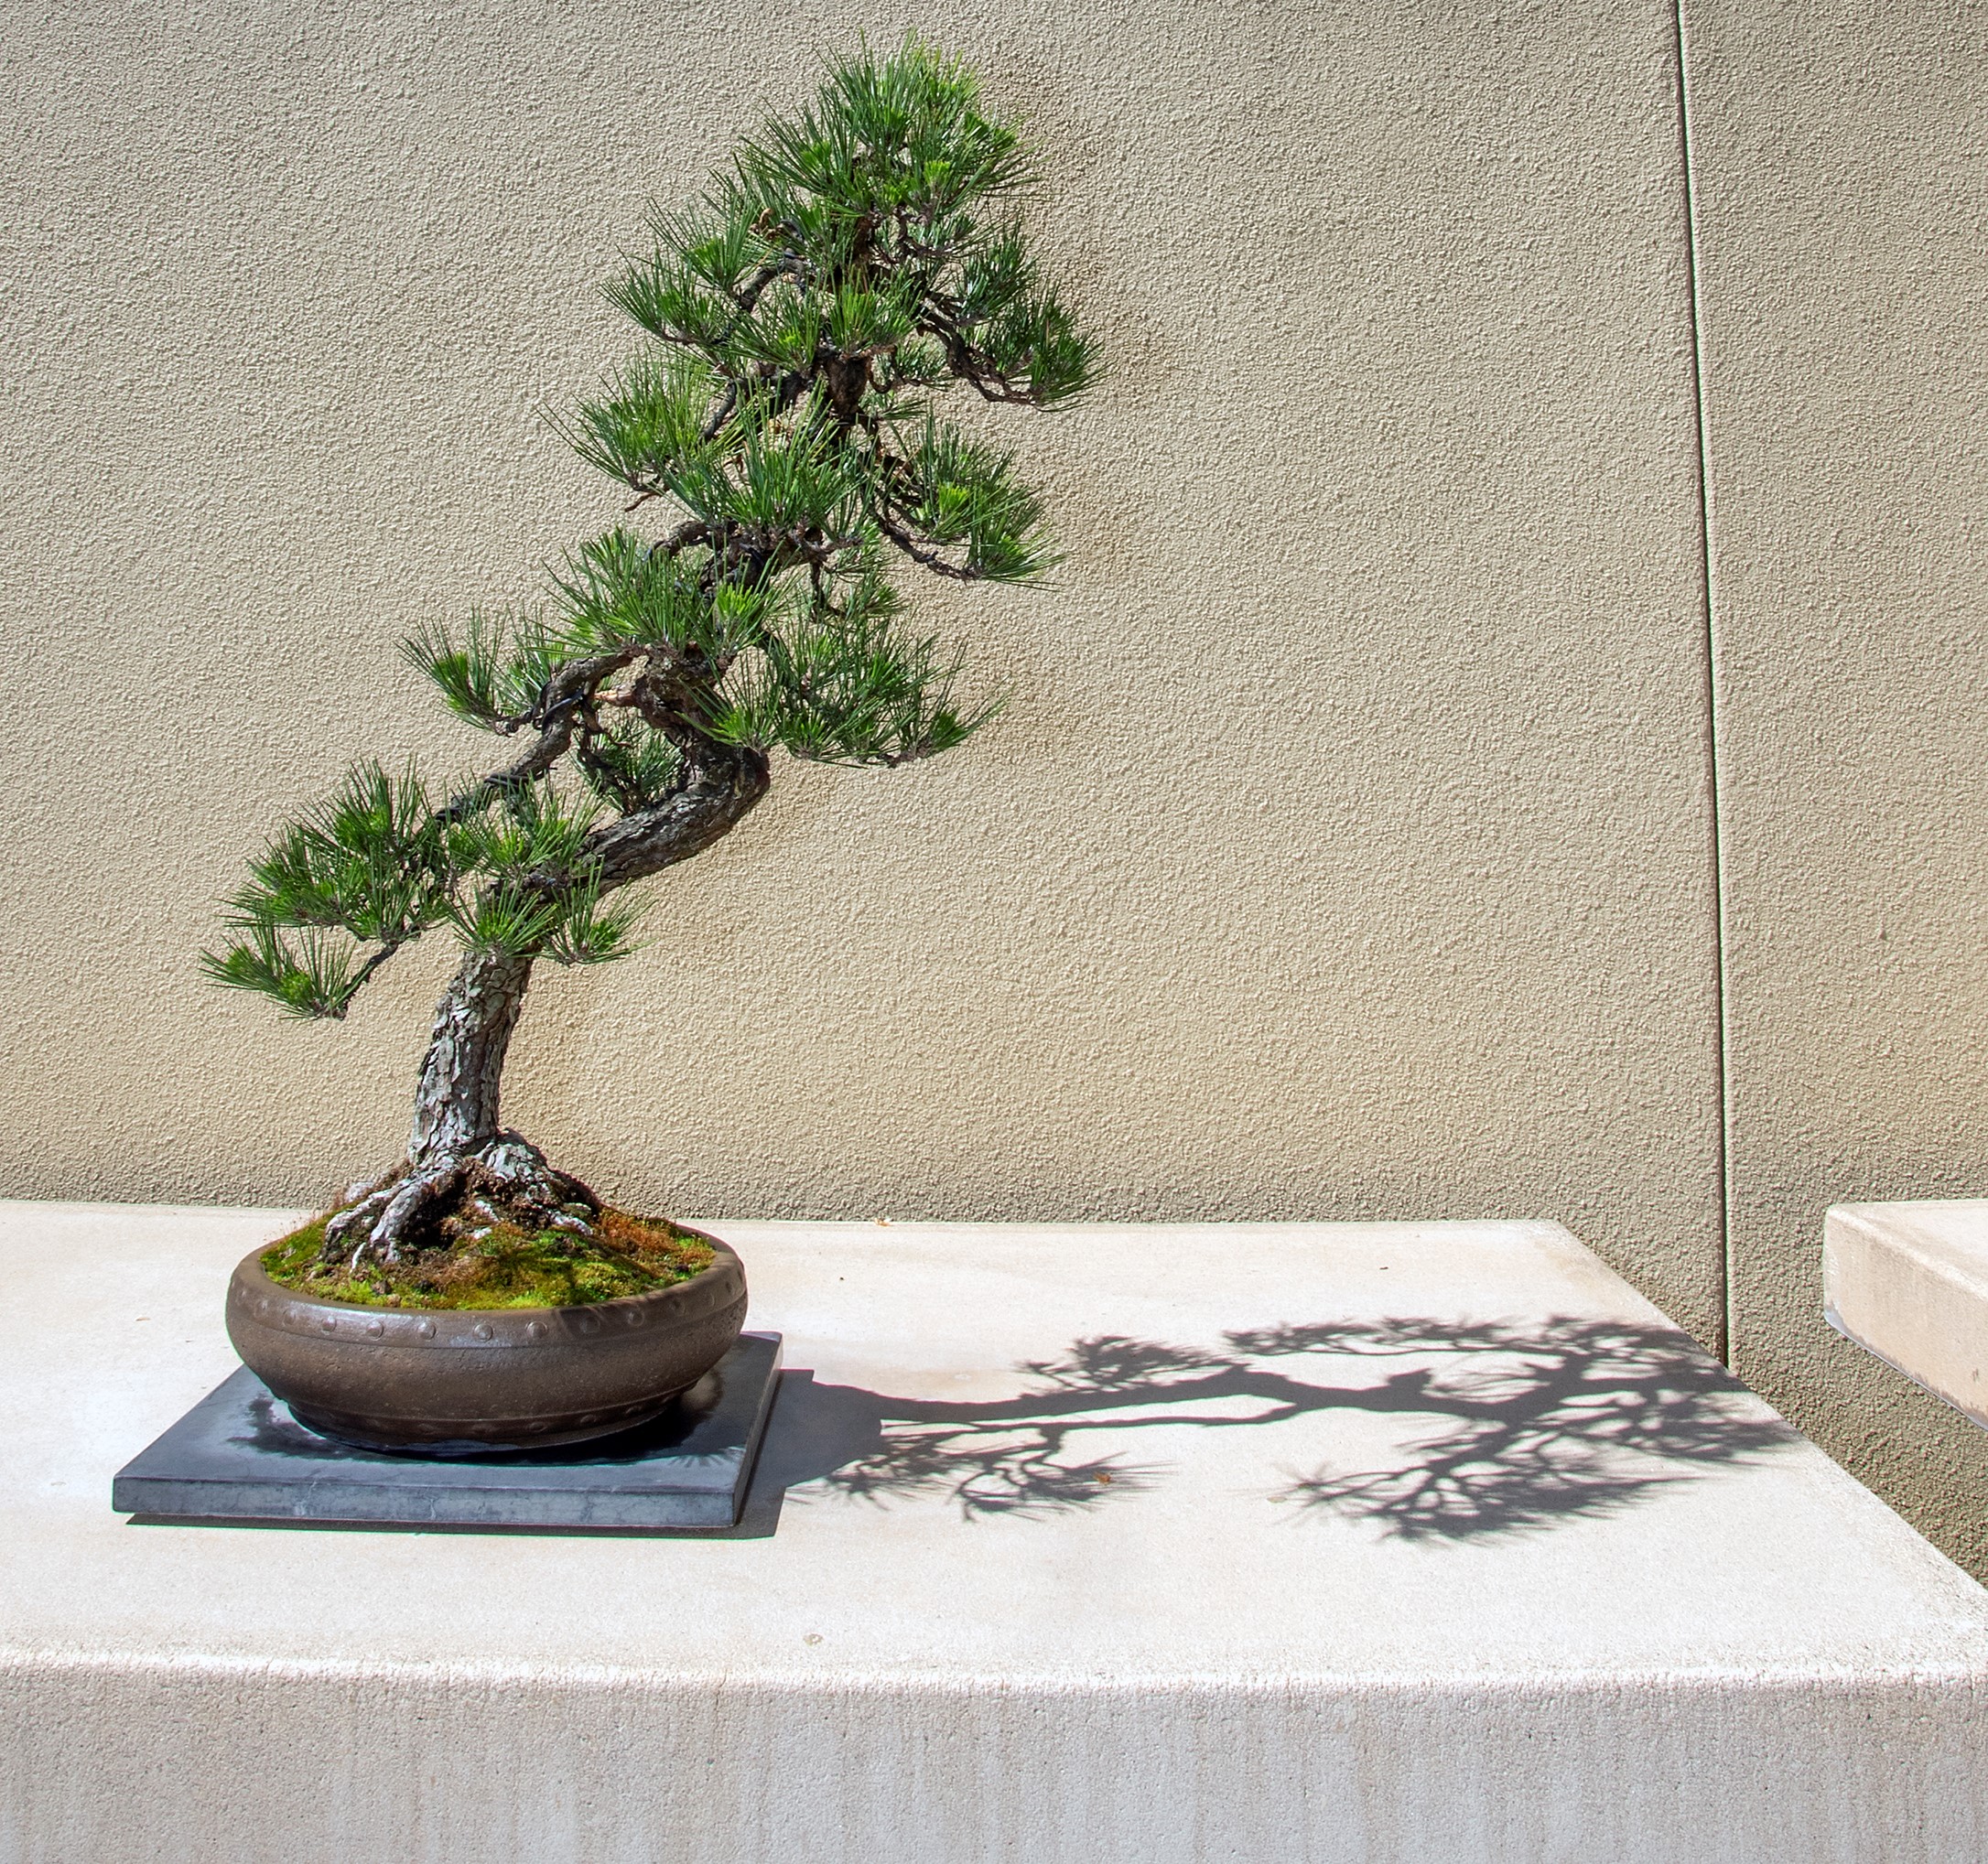 The Japanese black pine bonsai on display at Pacific Bonsai Museum in Federal Way. It was grown from a seed by a Japanese-American prisoner of an internment camp during World War II. (Pacific Bonsai Museum.)